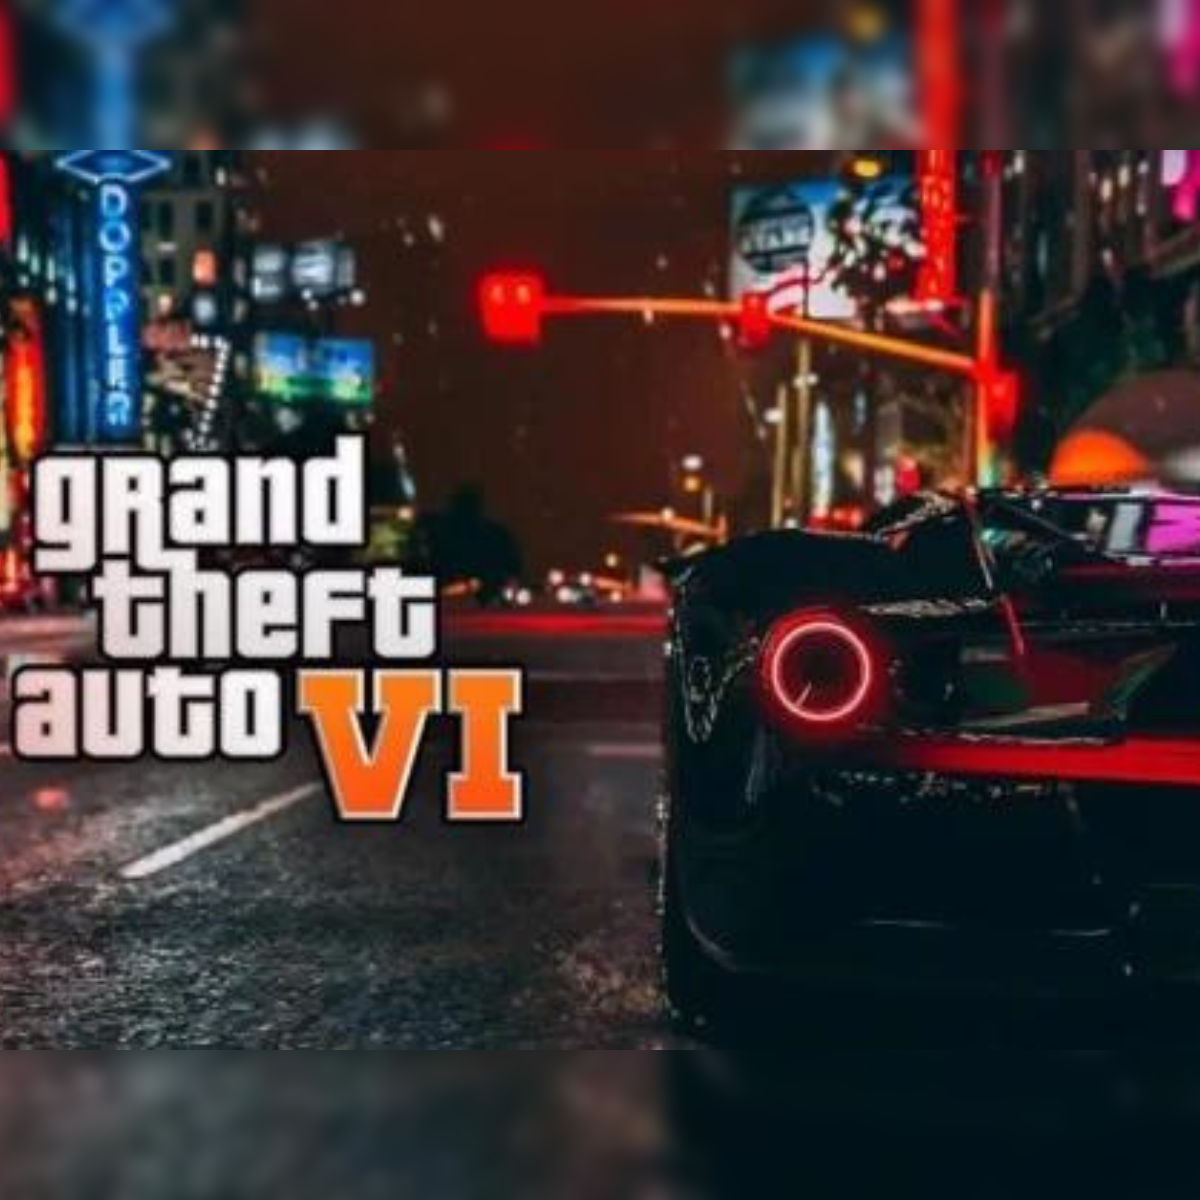 GTA 6 Trailer Leaks For Next Week Create Buzz - Is It the Real Deal?